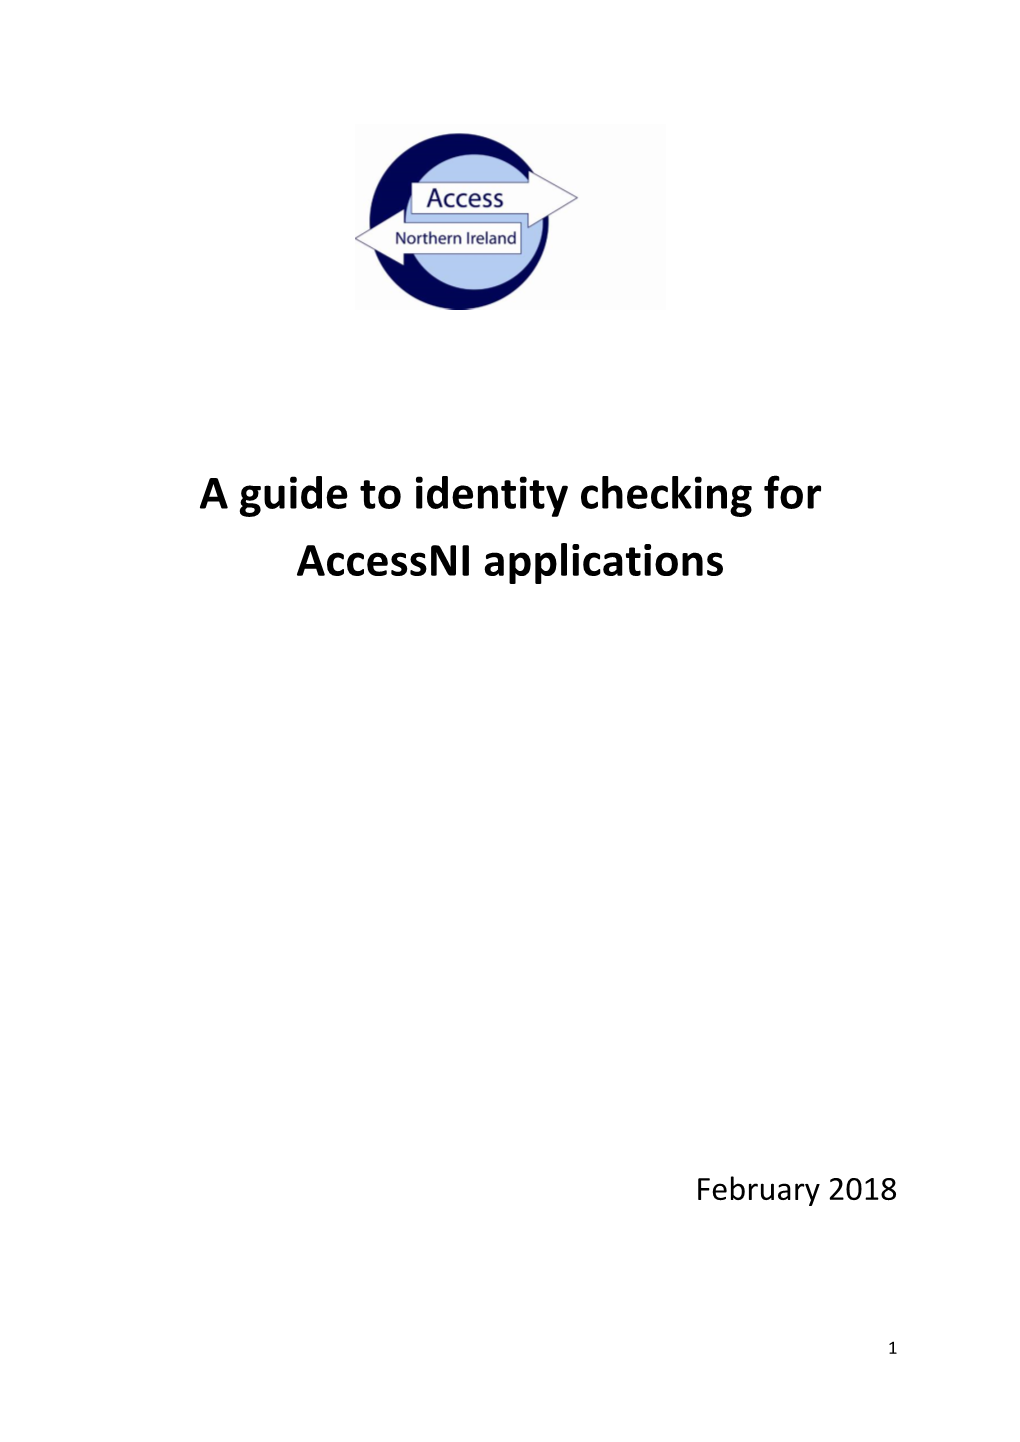 A Guide to Identity Checking for Accessni Applications